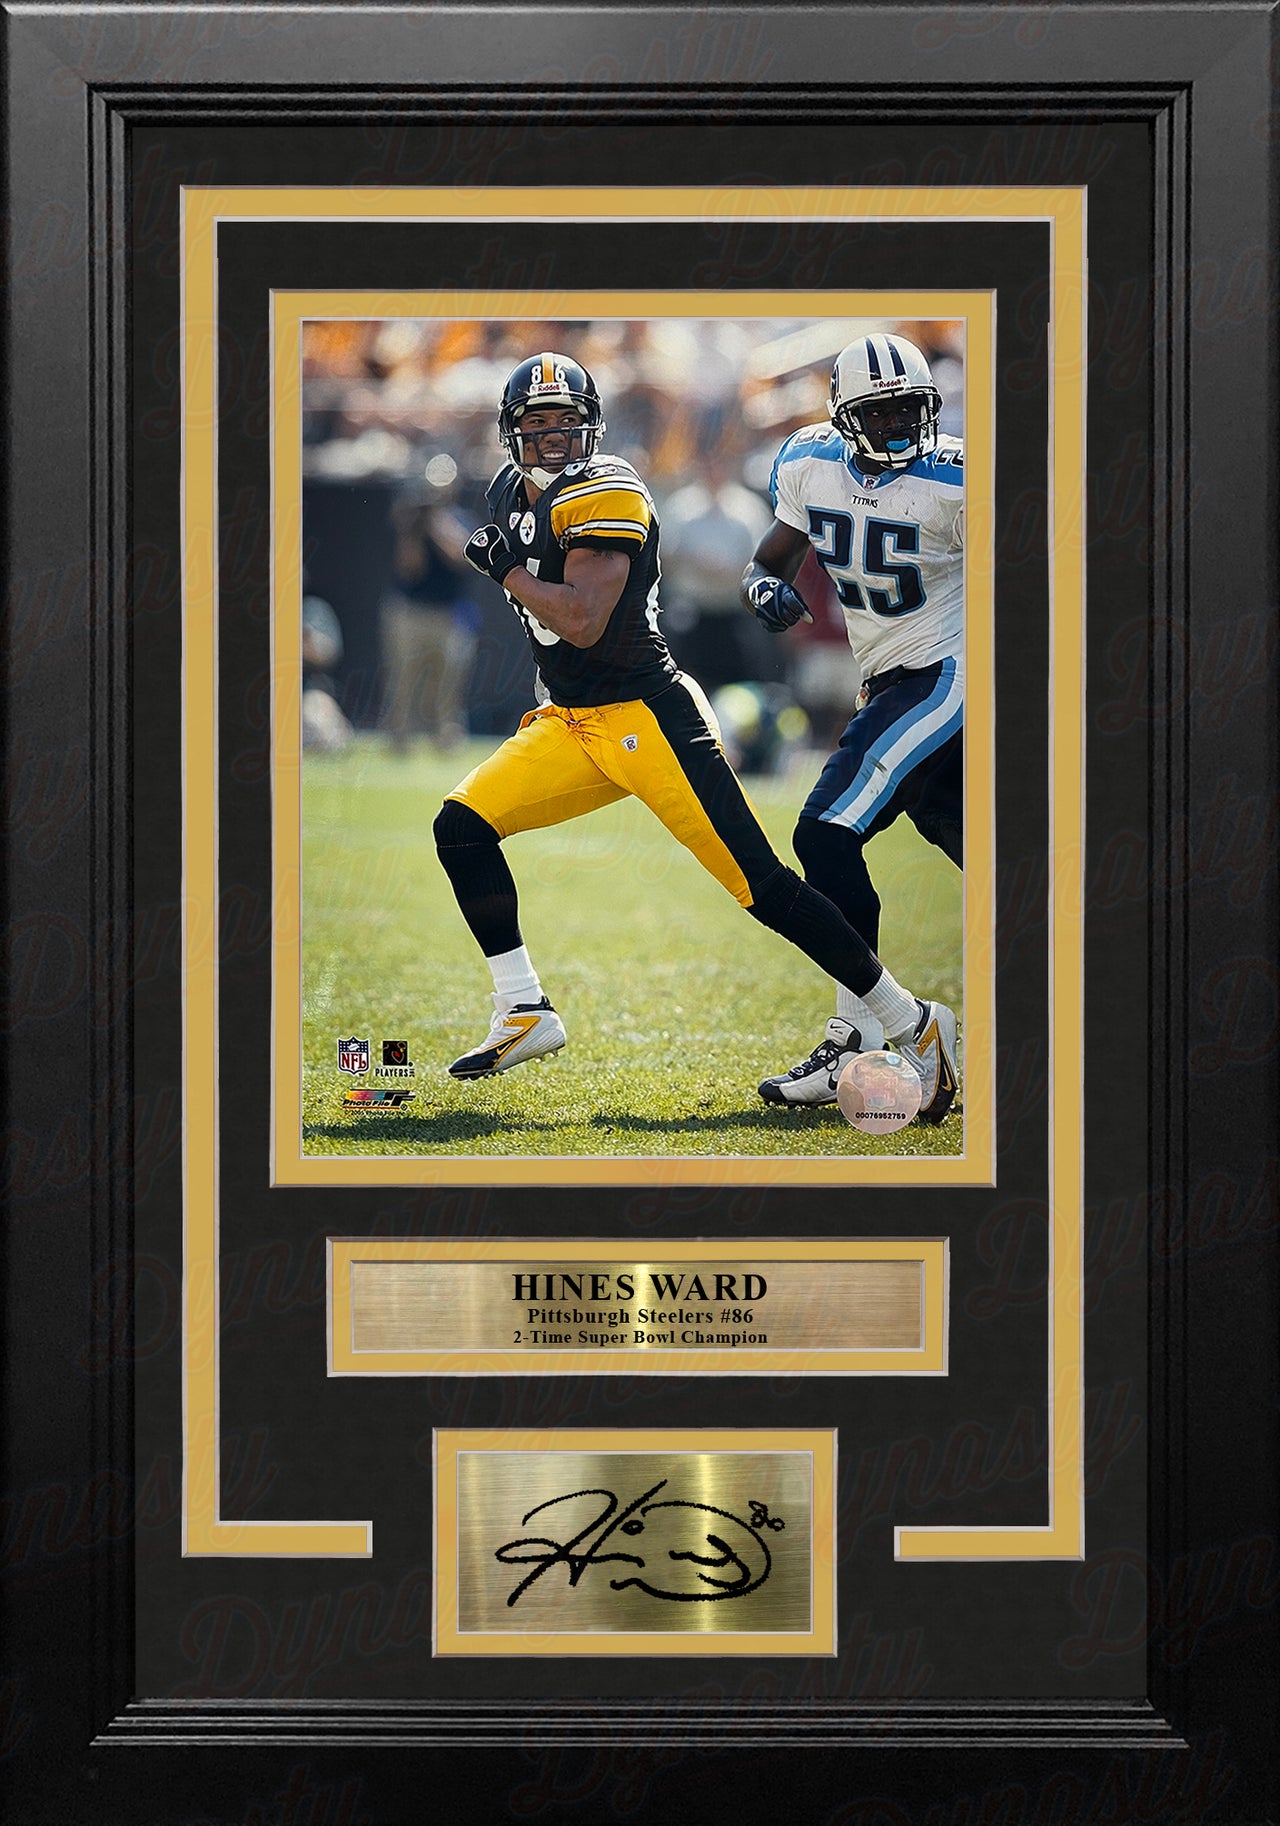 Hines Ward in Action Pittsburgh Steelers 8" x 10" Framed Football Photo with Engraved Autograph